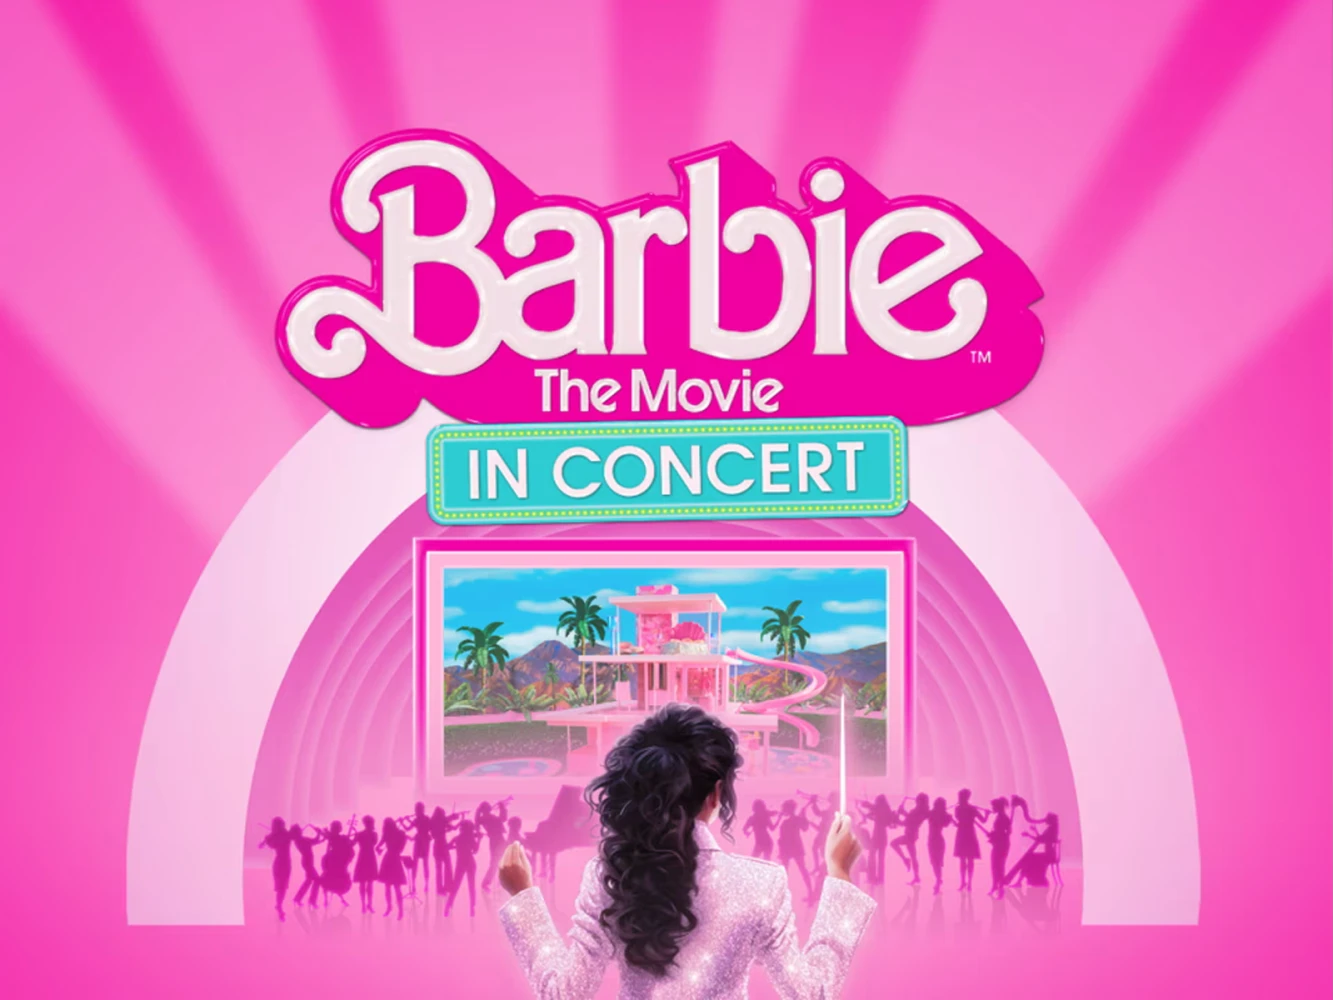 Barbie The Movie: In Concert: What to expect - 1